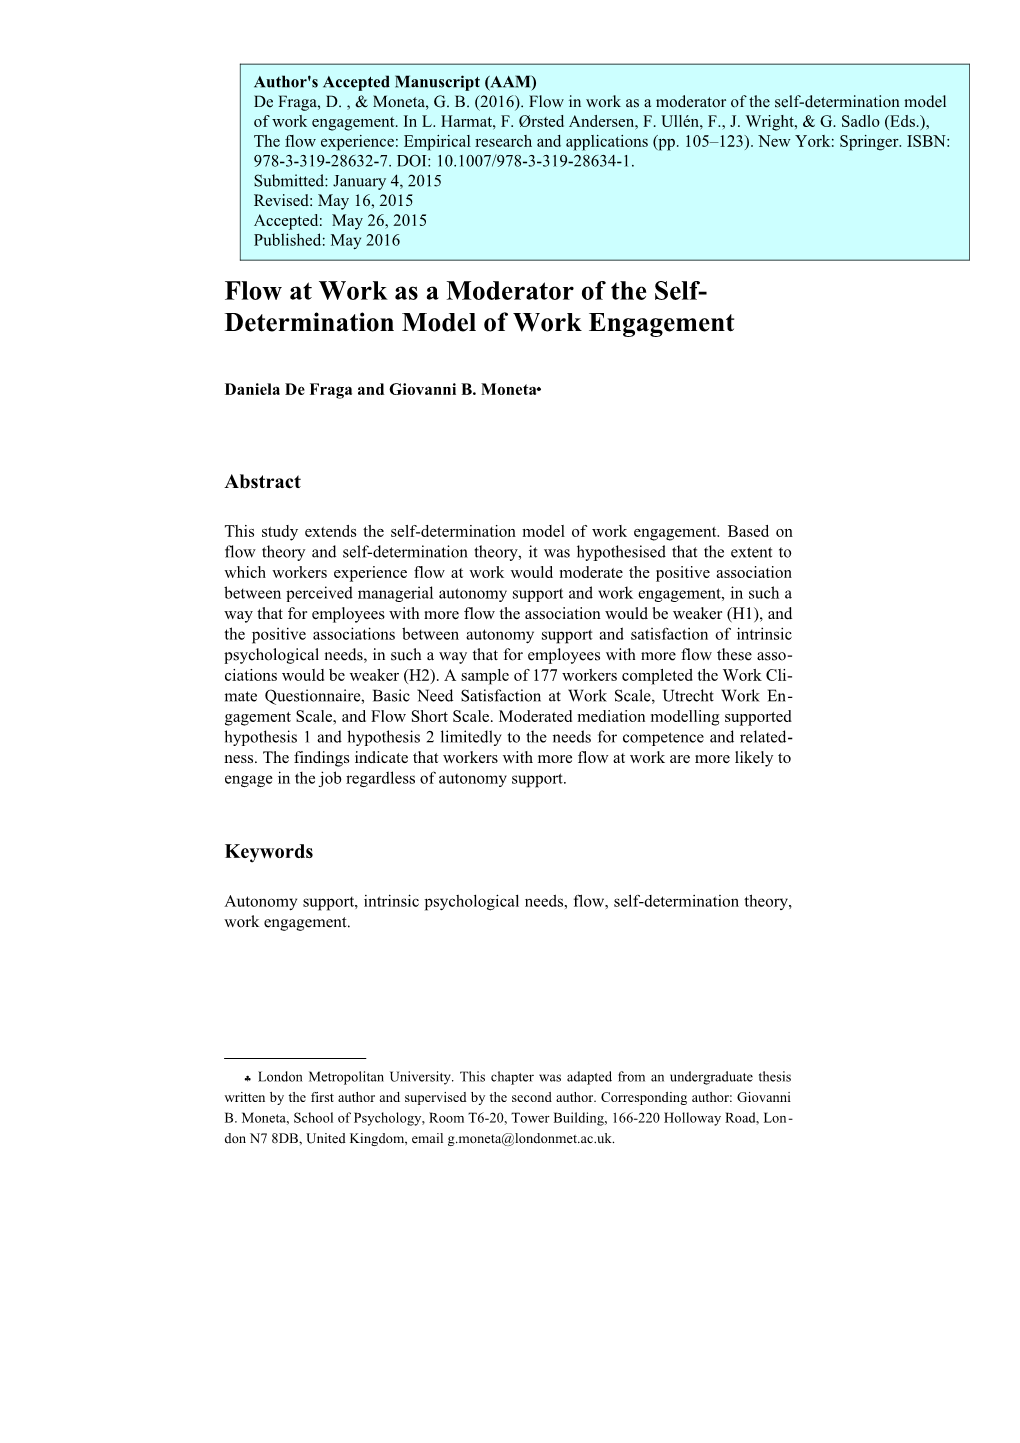 Flow at Work As a Moderator of the Self-Determination Model of Work Engagement